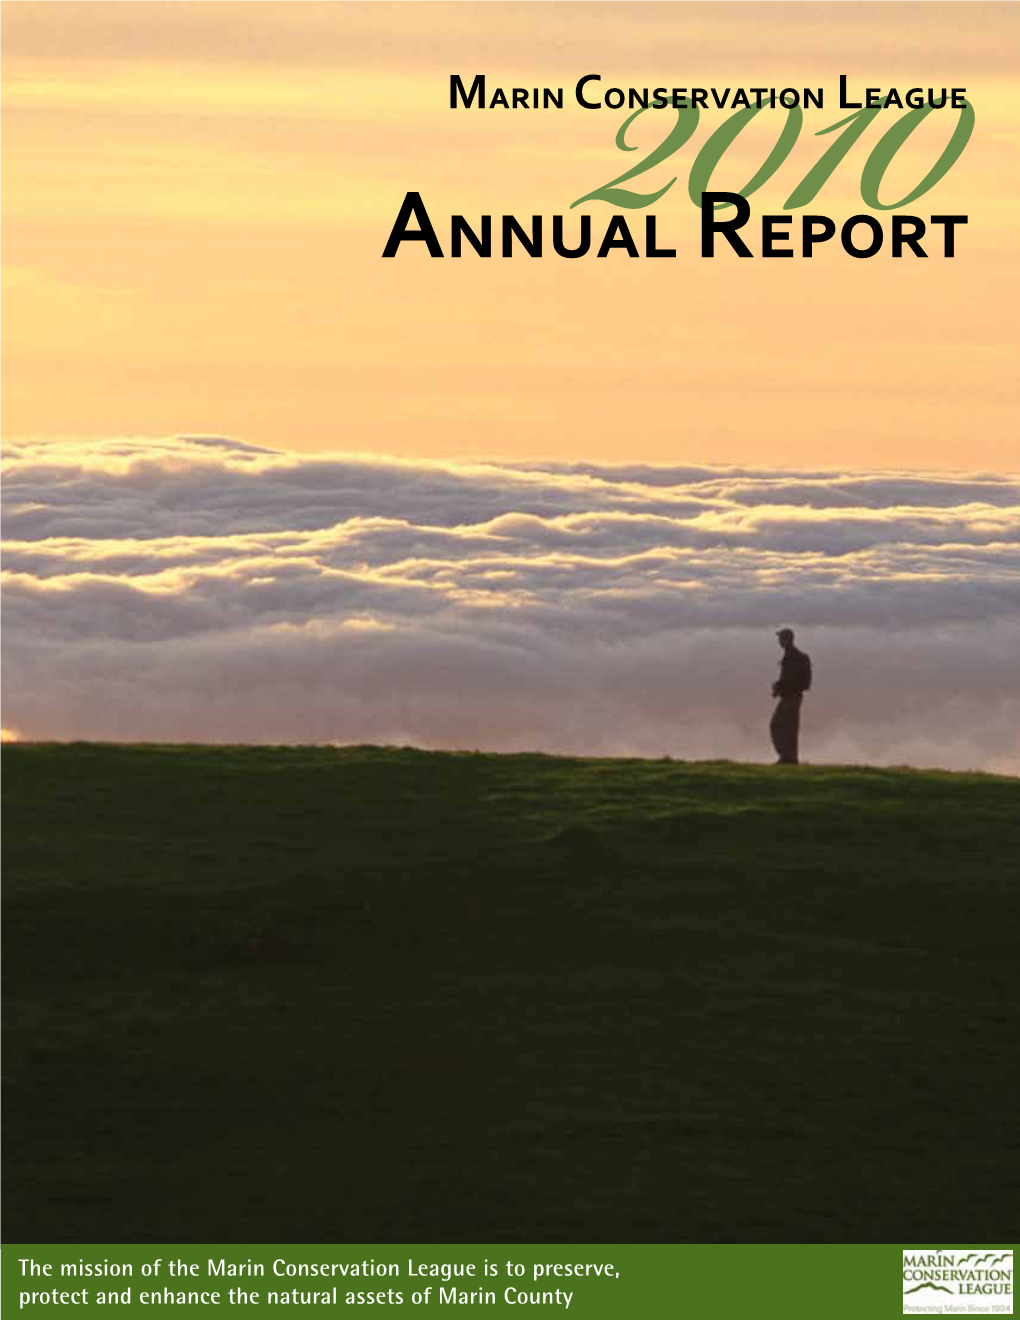 2010 Annual Report Marin Conservation League Actions & Accomplishments